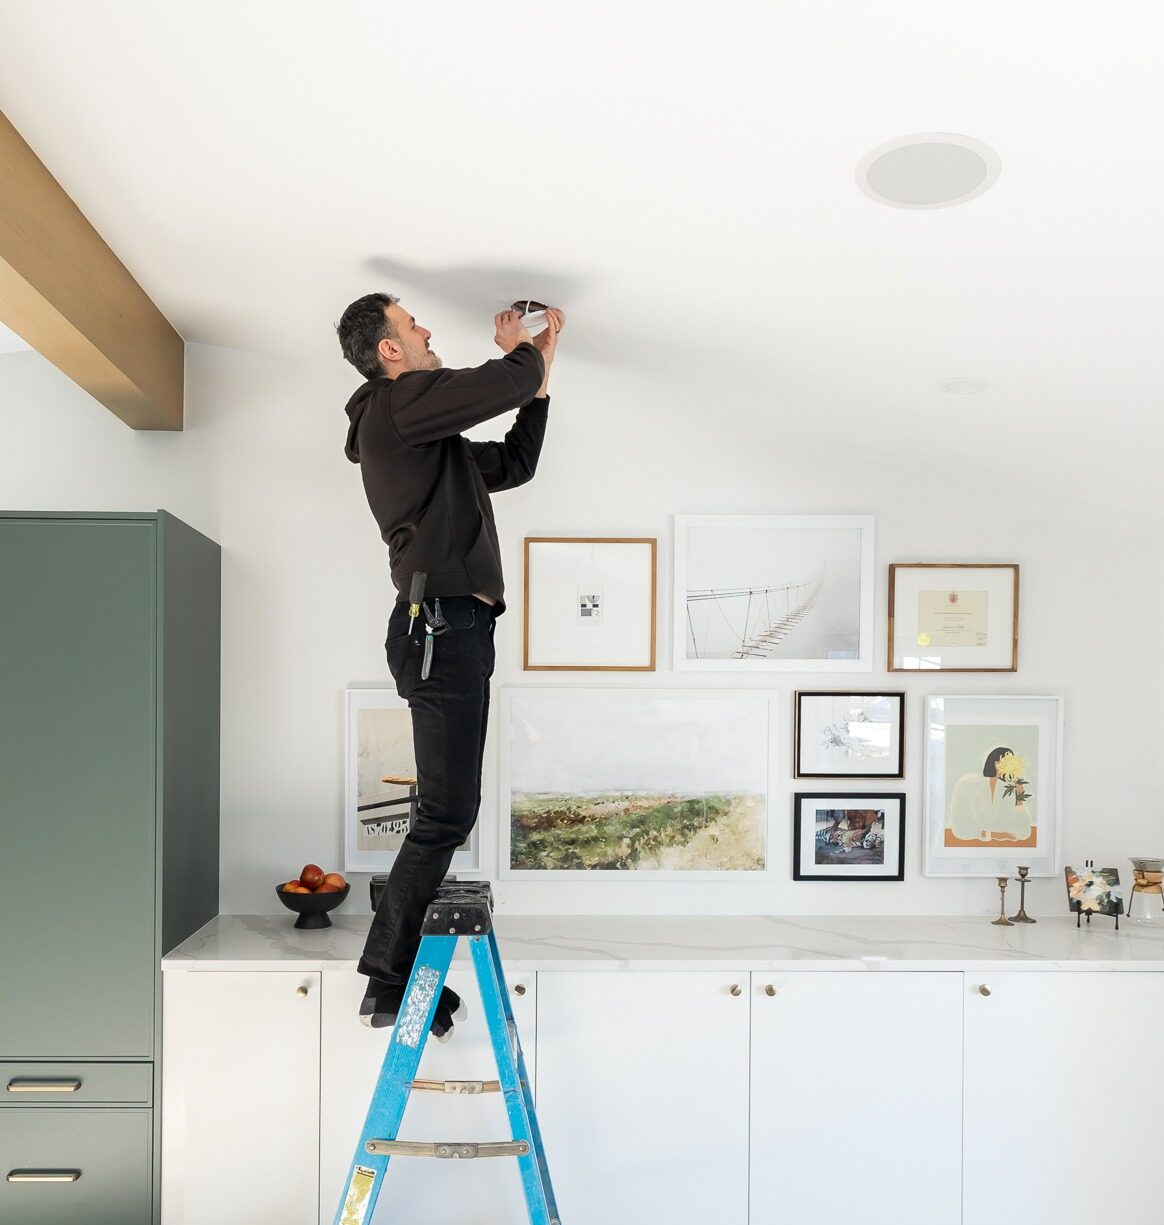 A person is standing on a ladder, installing a smoke detector on the ceiling of a kitchen adorned with framed artwork on the walls.